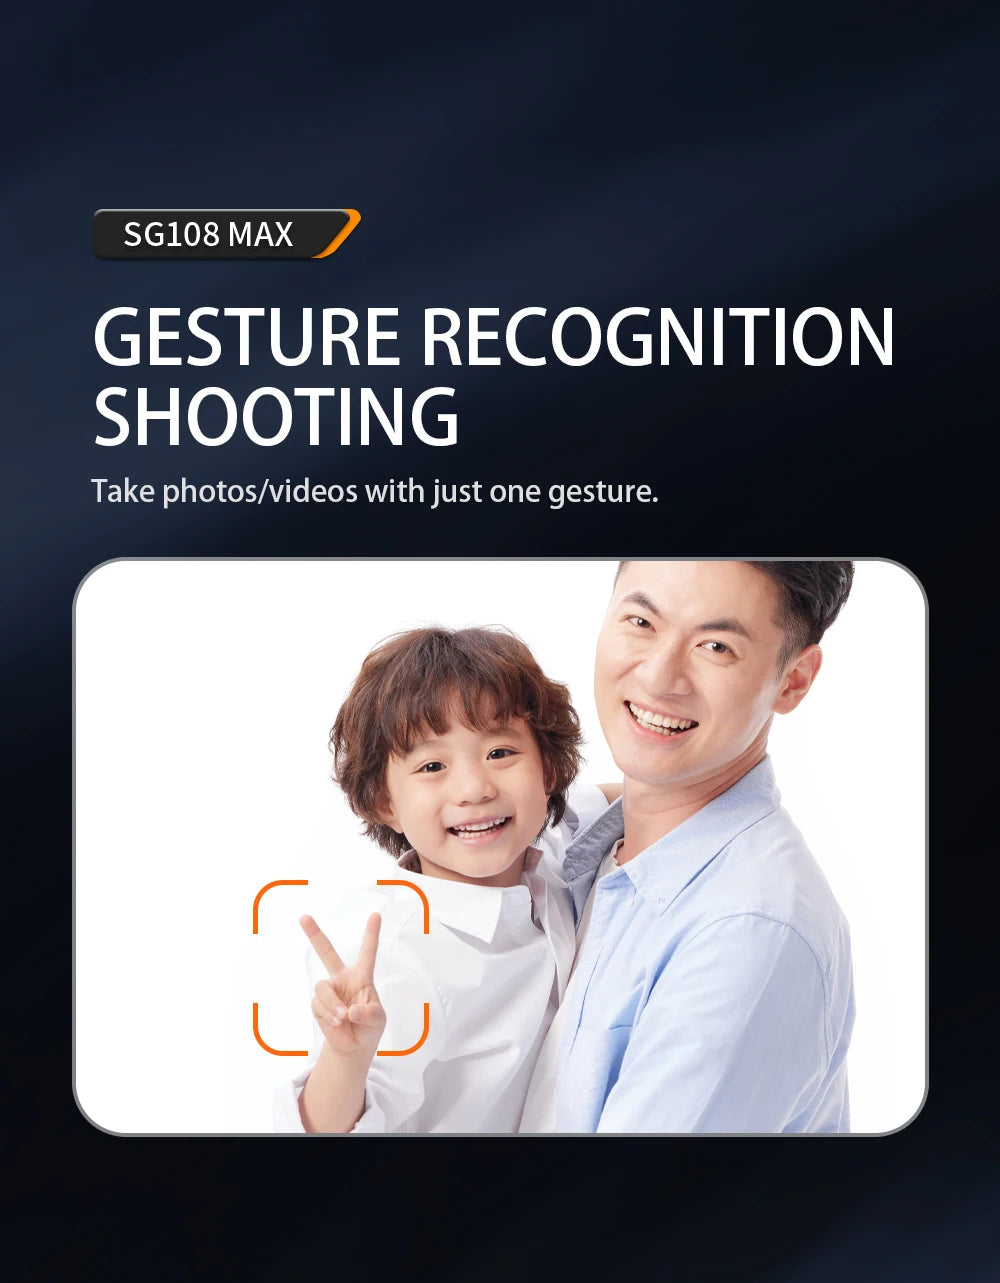 SG108 / SG108 Max Drone, SG108 MAX GESTURE RECOGNITION SHOOTING Take photos/